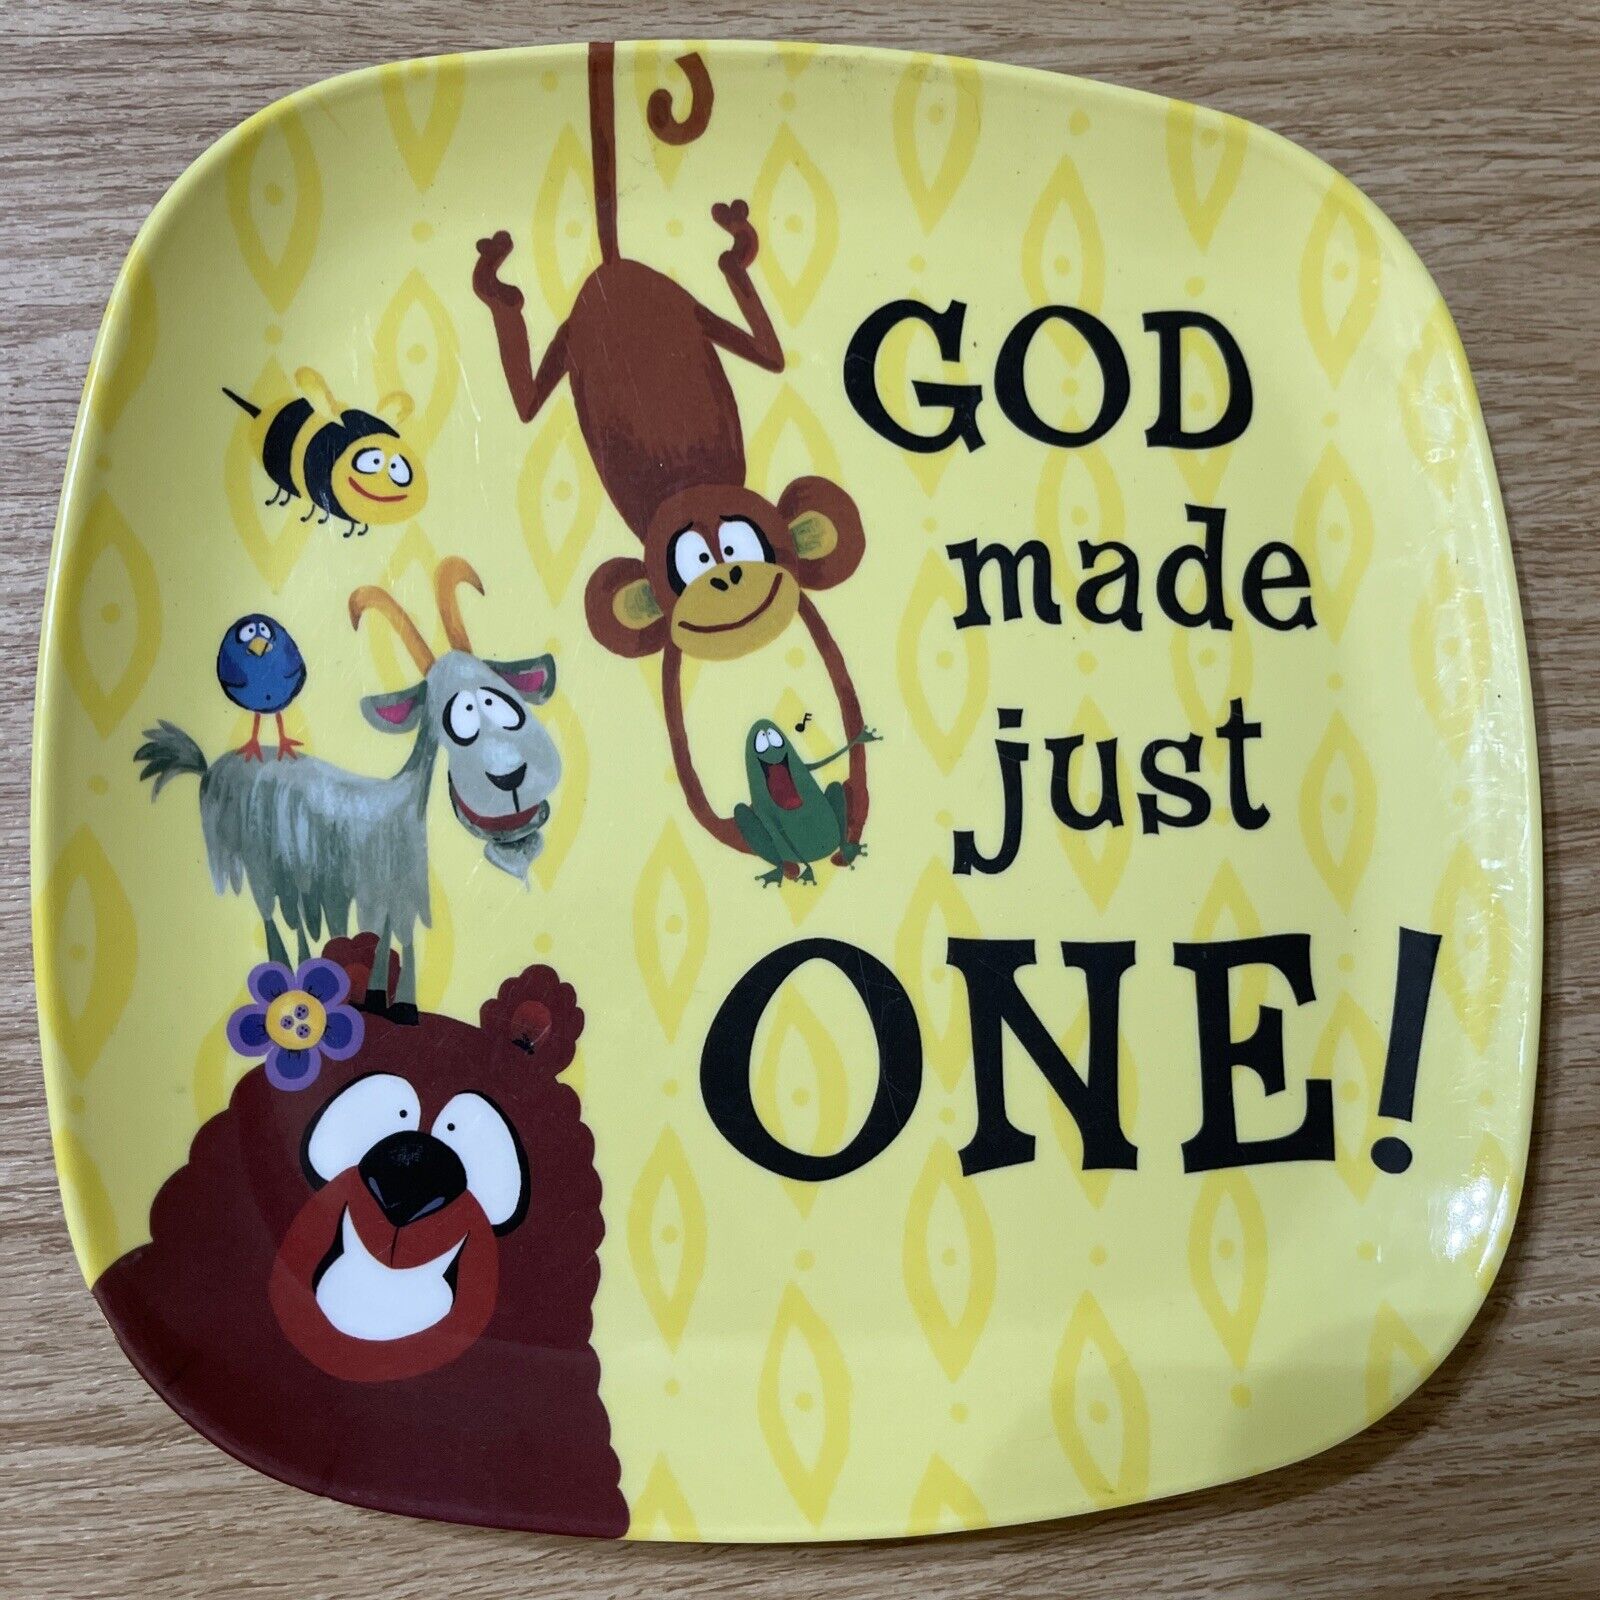 Kids Monkey Animal Baby Plate  God Made Just One  Children's Religious